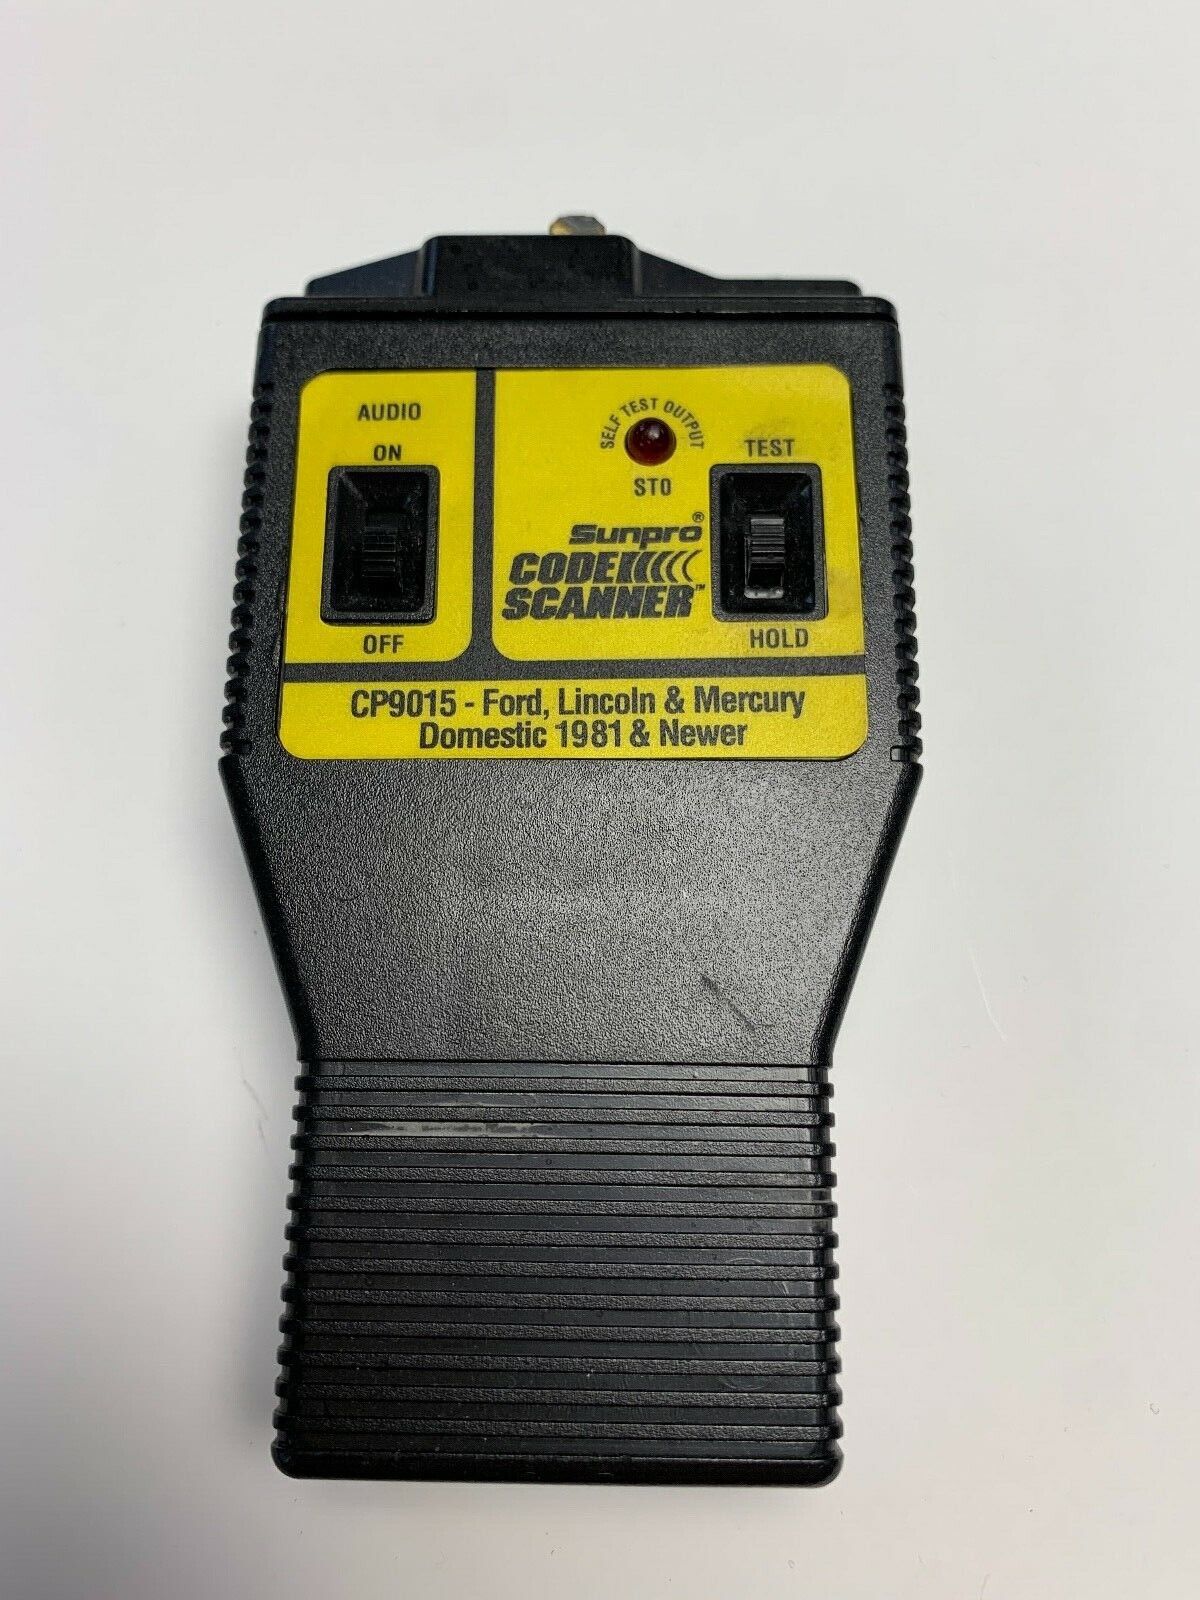 SUNPRO CODE SCANNER CP9015- FORD, LINCOLN, & MERCURY DOMESTIC 1981 AND NEWER